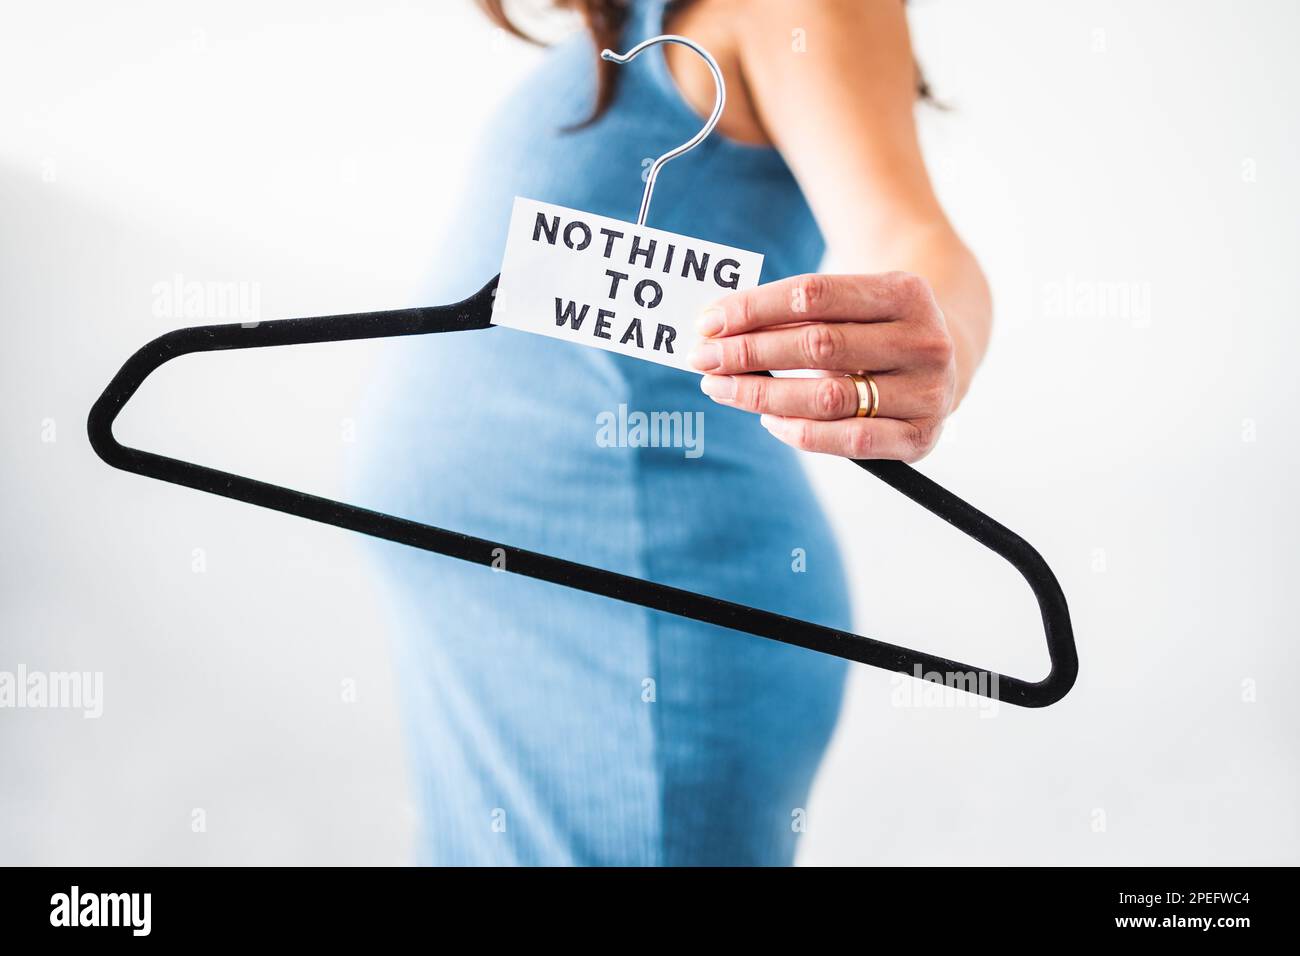 Nothing to Wear sign held by pregnant woman in the last month of pregnancy wearing stretchy blue dress showing her bump, maternity wear and inclusive Stock Photo